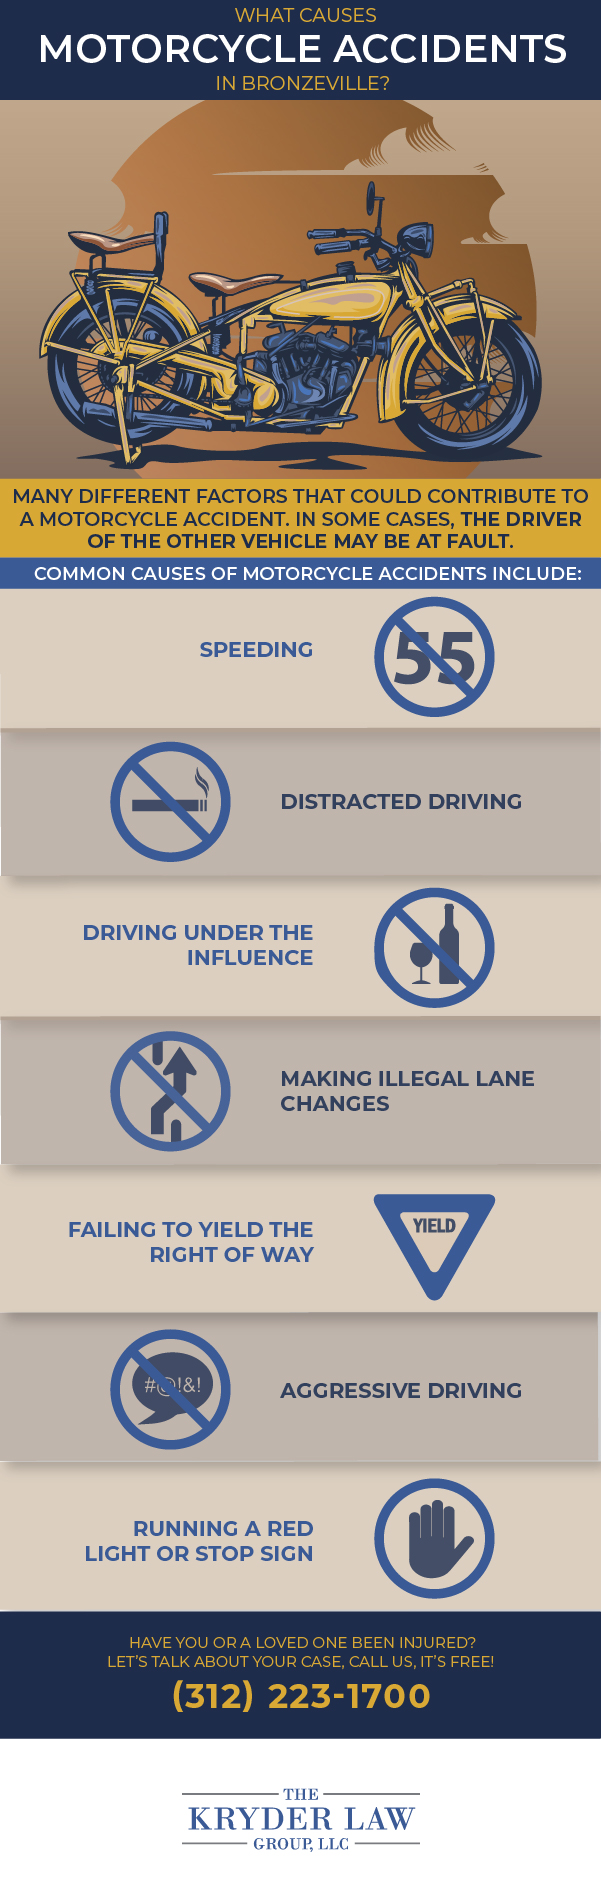 Bronzeville Motorcycle Accident Lawyer Infographic